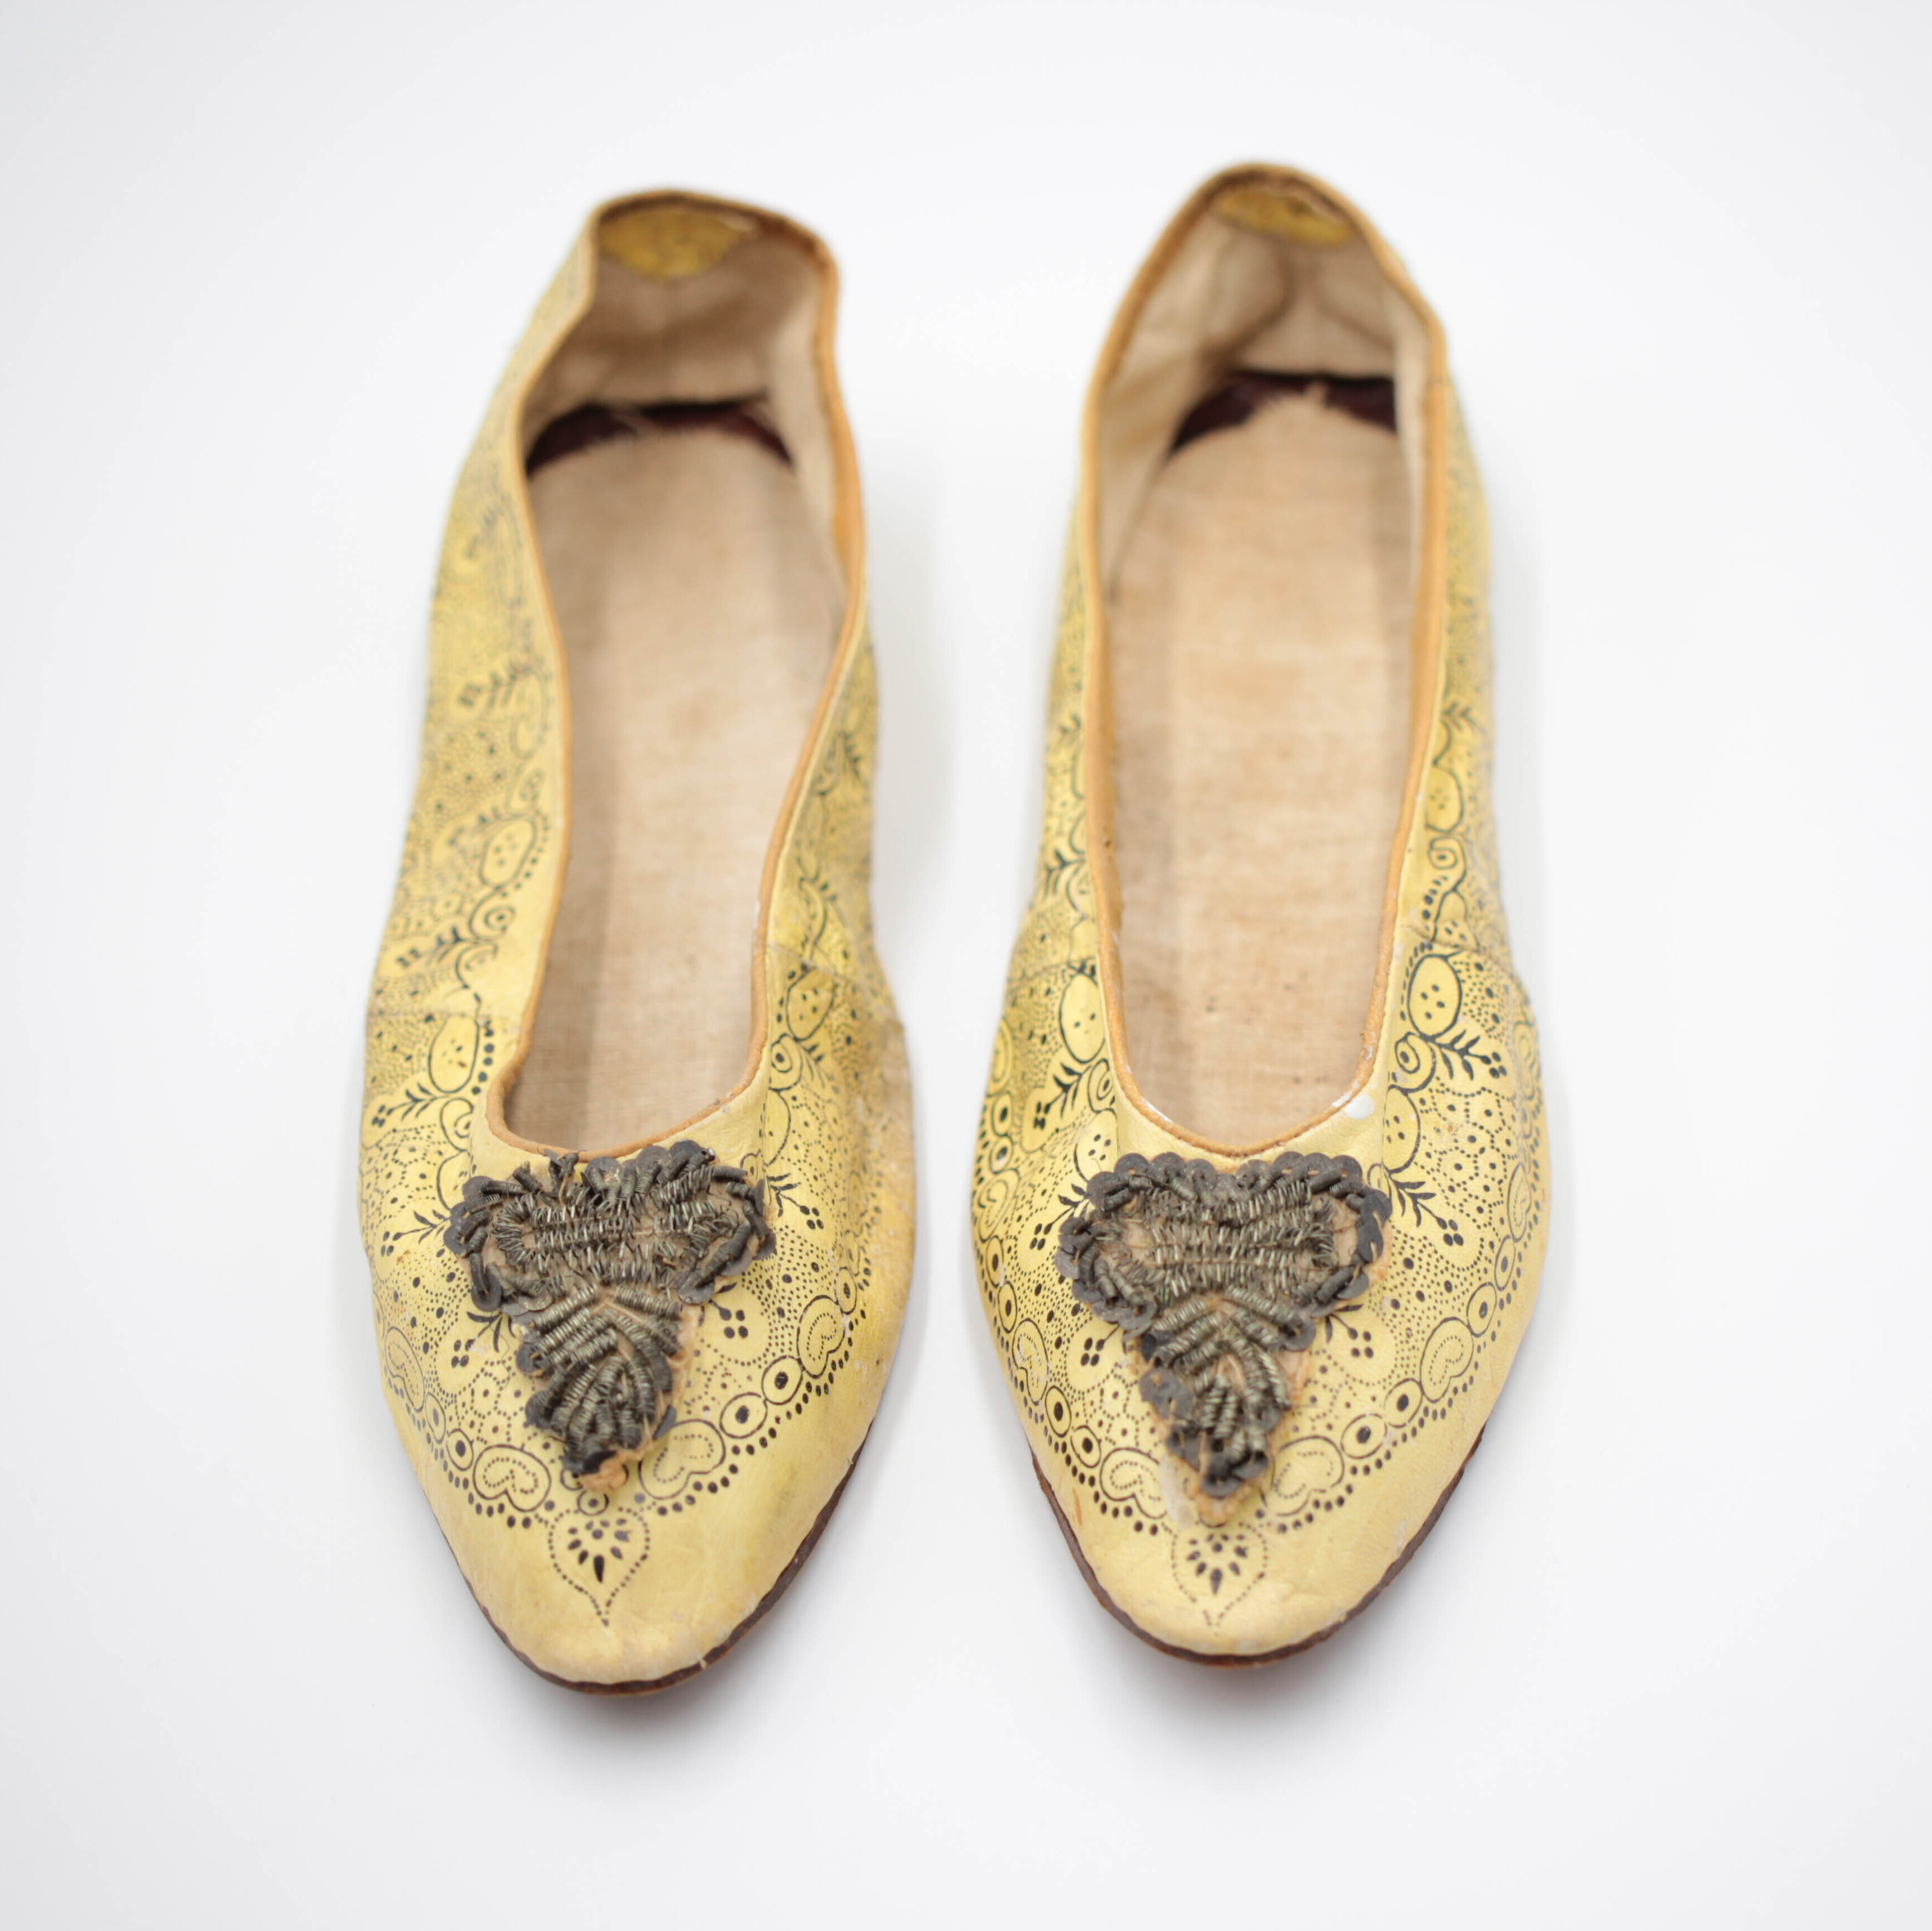 pair of yellow ladies shoes with beading